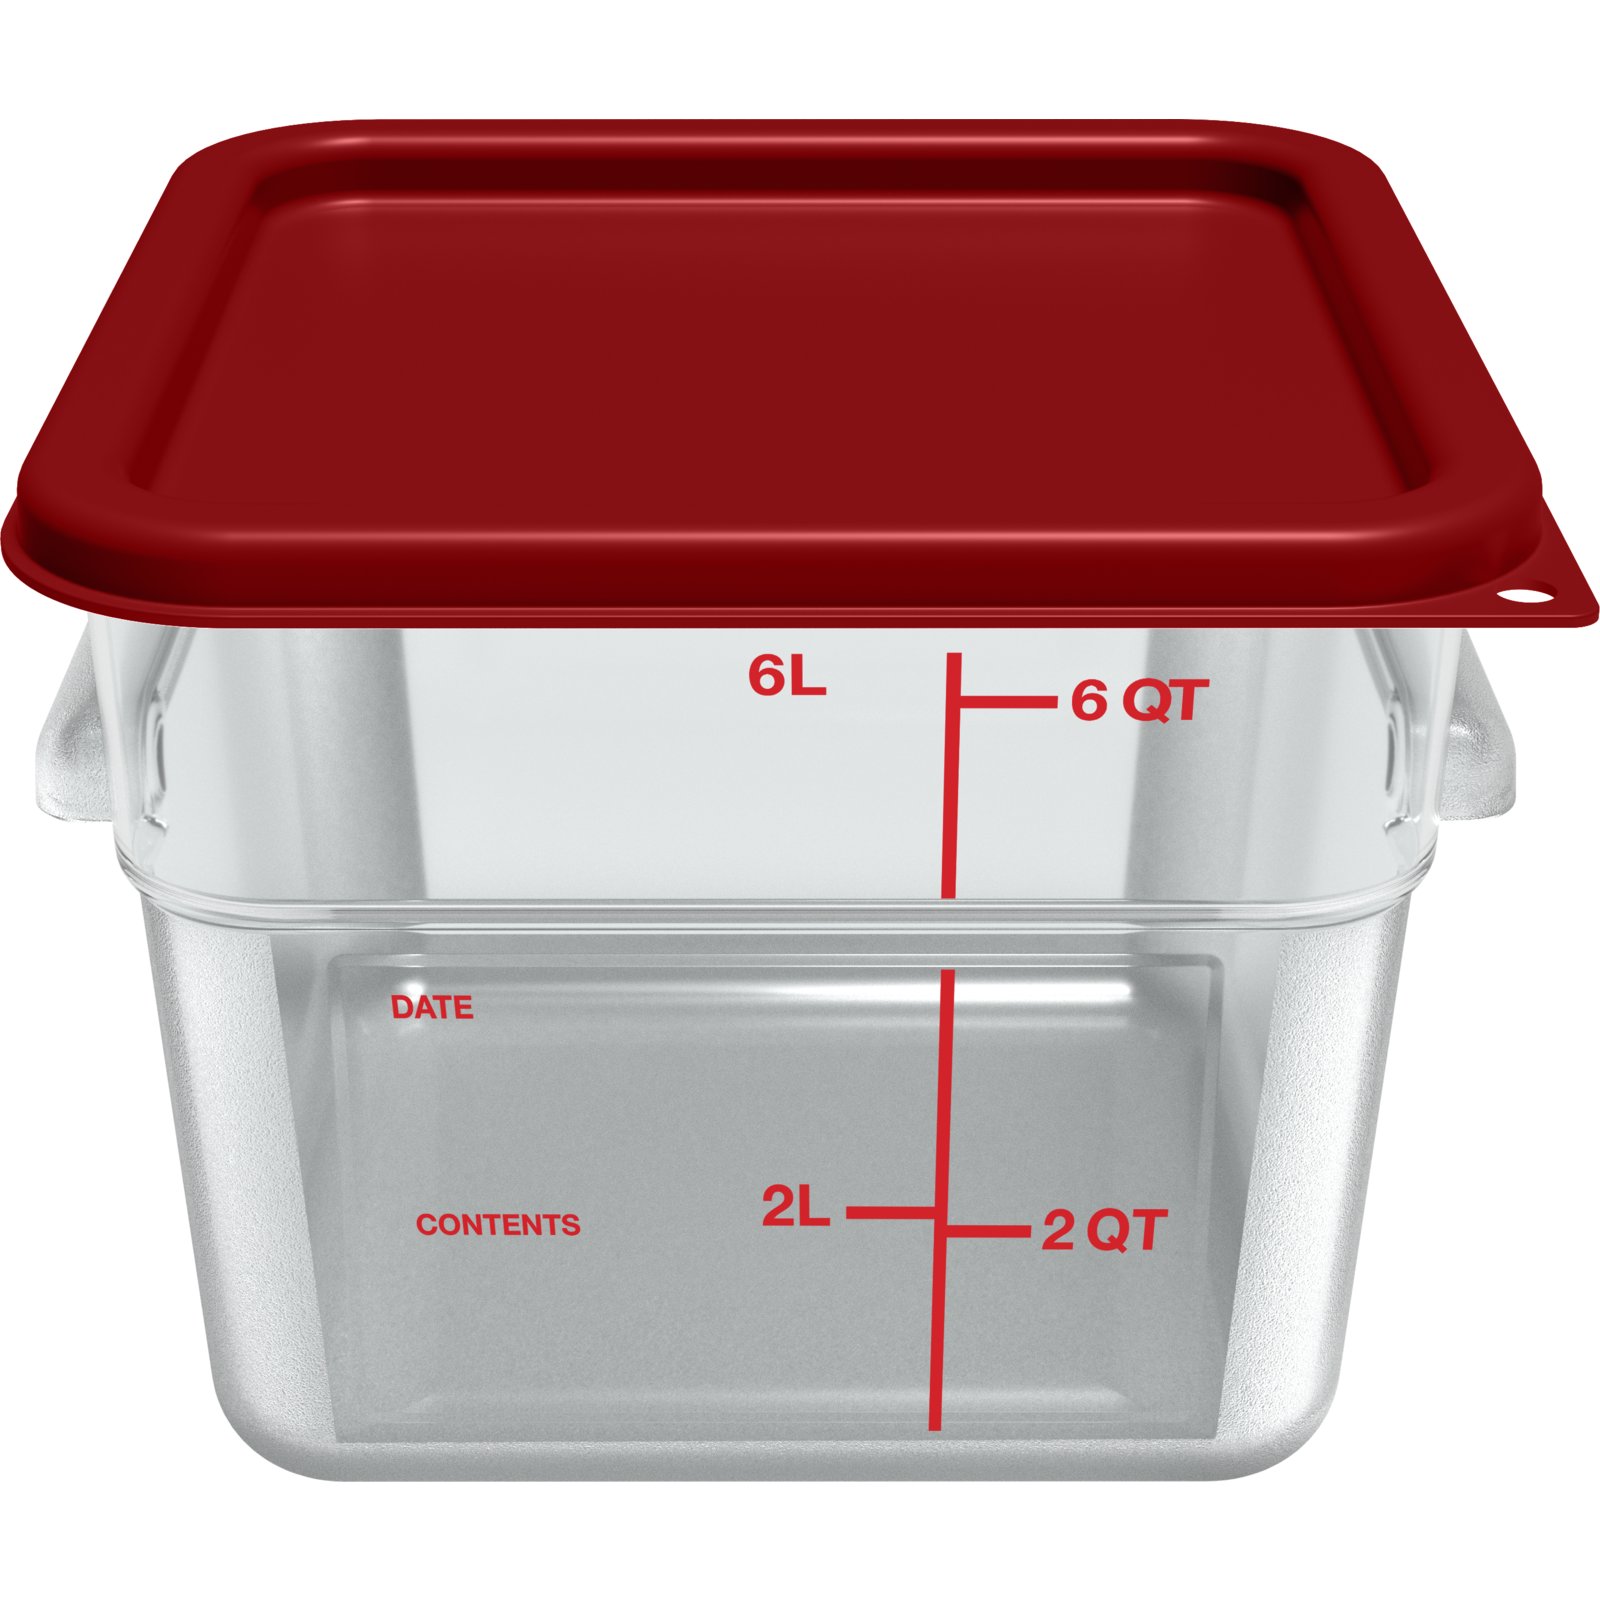 6 x 4-1/2 x 1-1/2 – 12 OZ - Rectangular Plastic Food Takeout Containers 